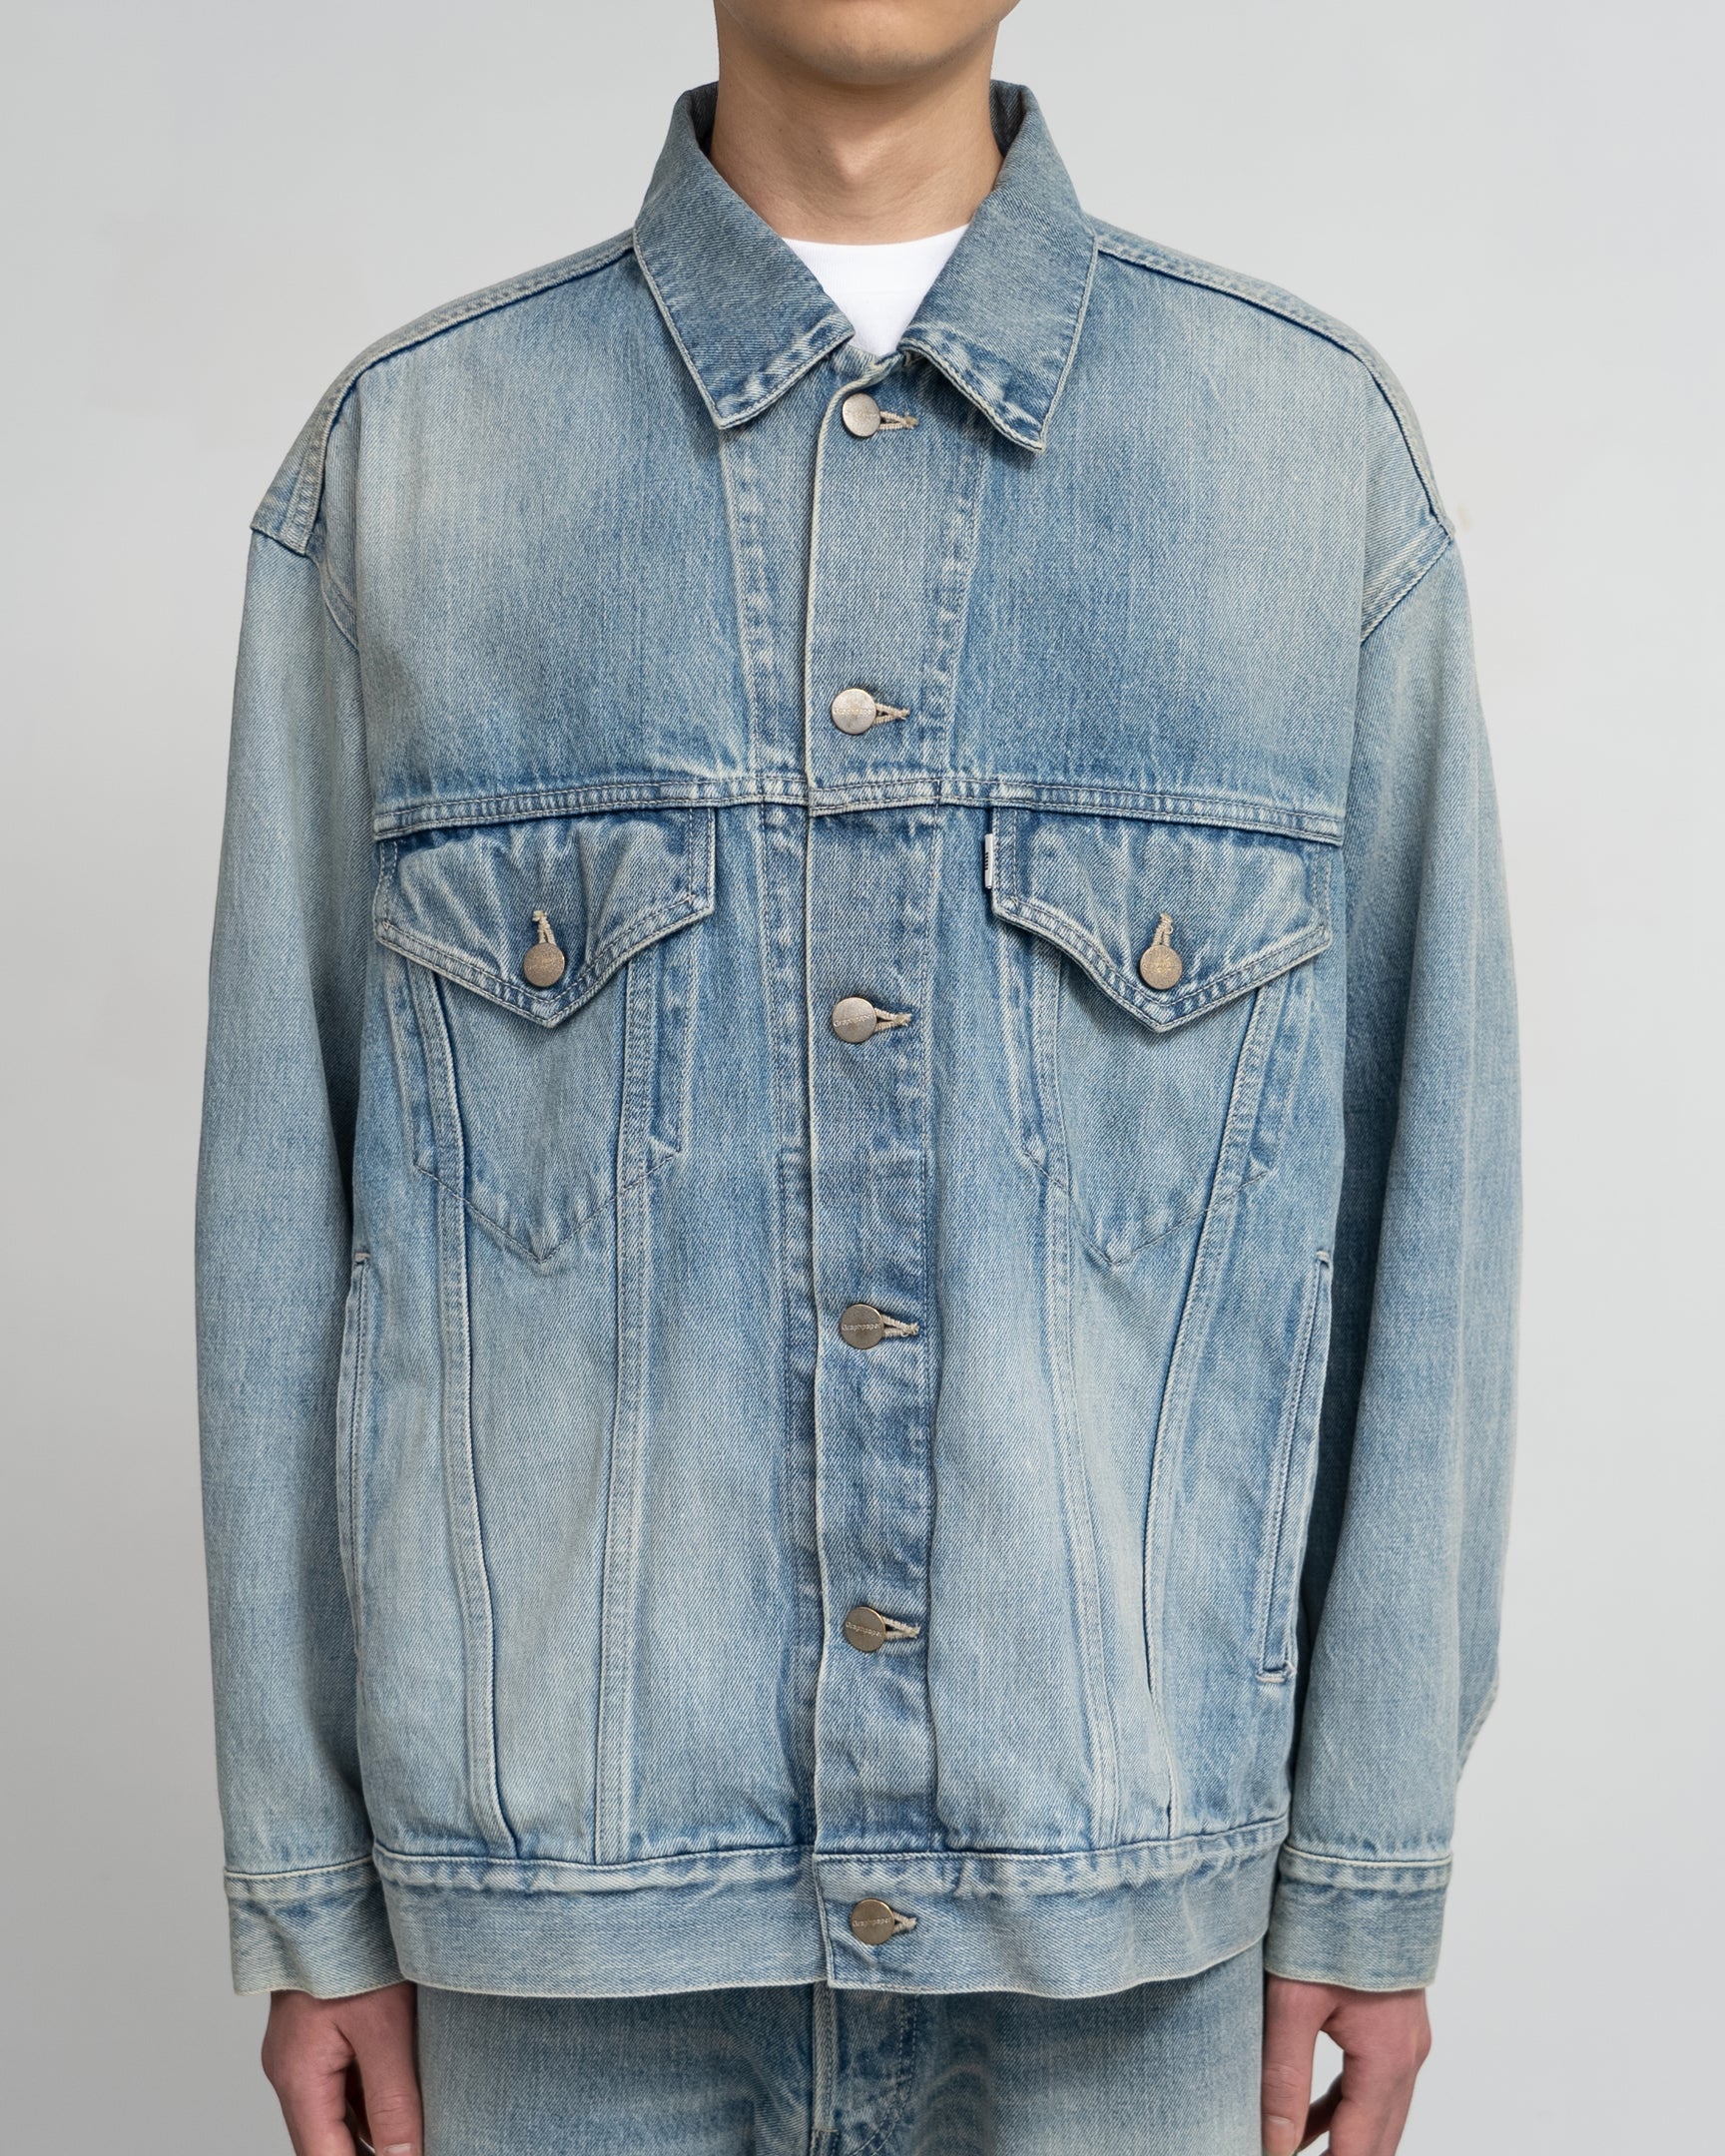 Graphpaper Selvage Denim Trucker Jacket - Light Fade – unexpected store